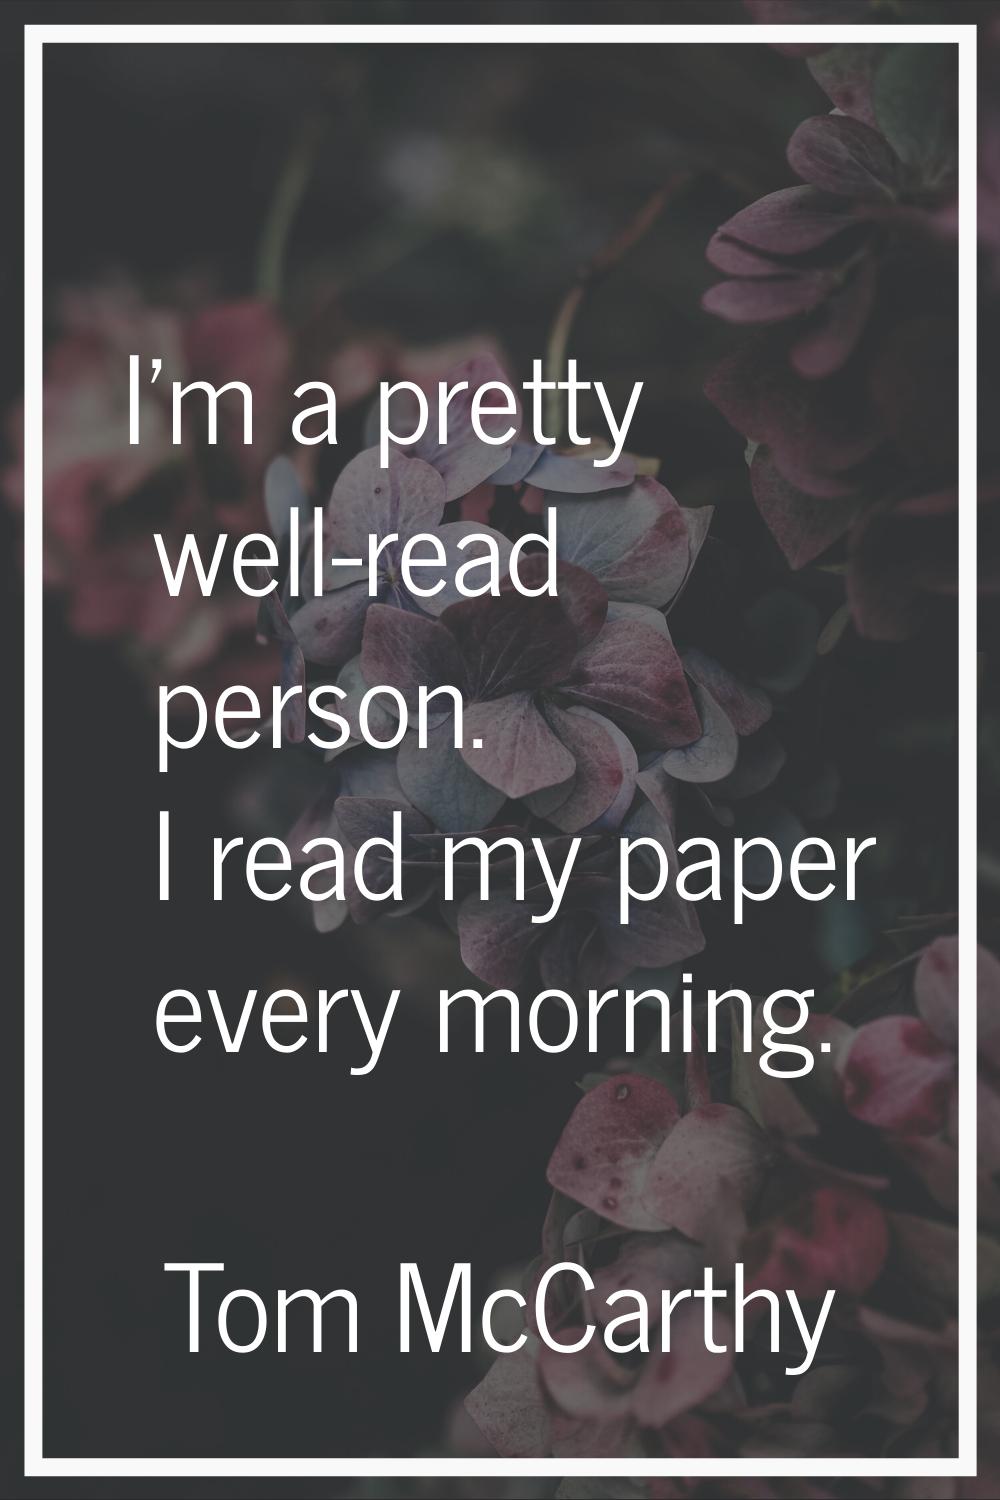 I'm a pretty well-read person. I read my paper every morning.